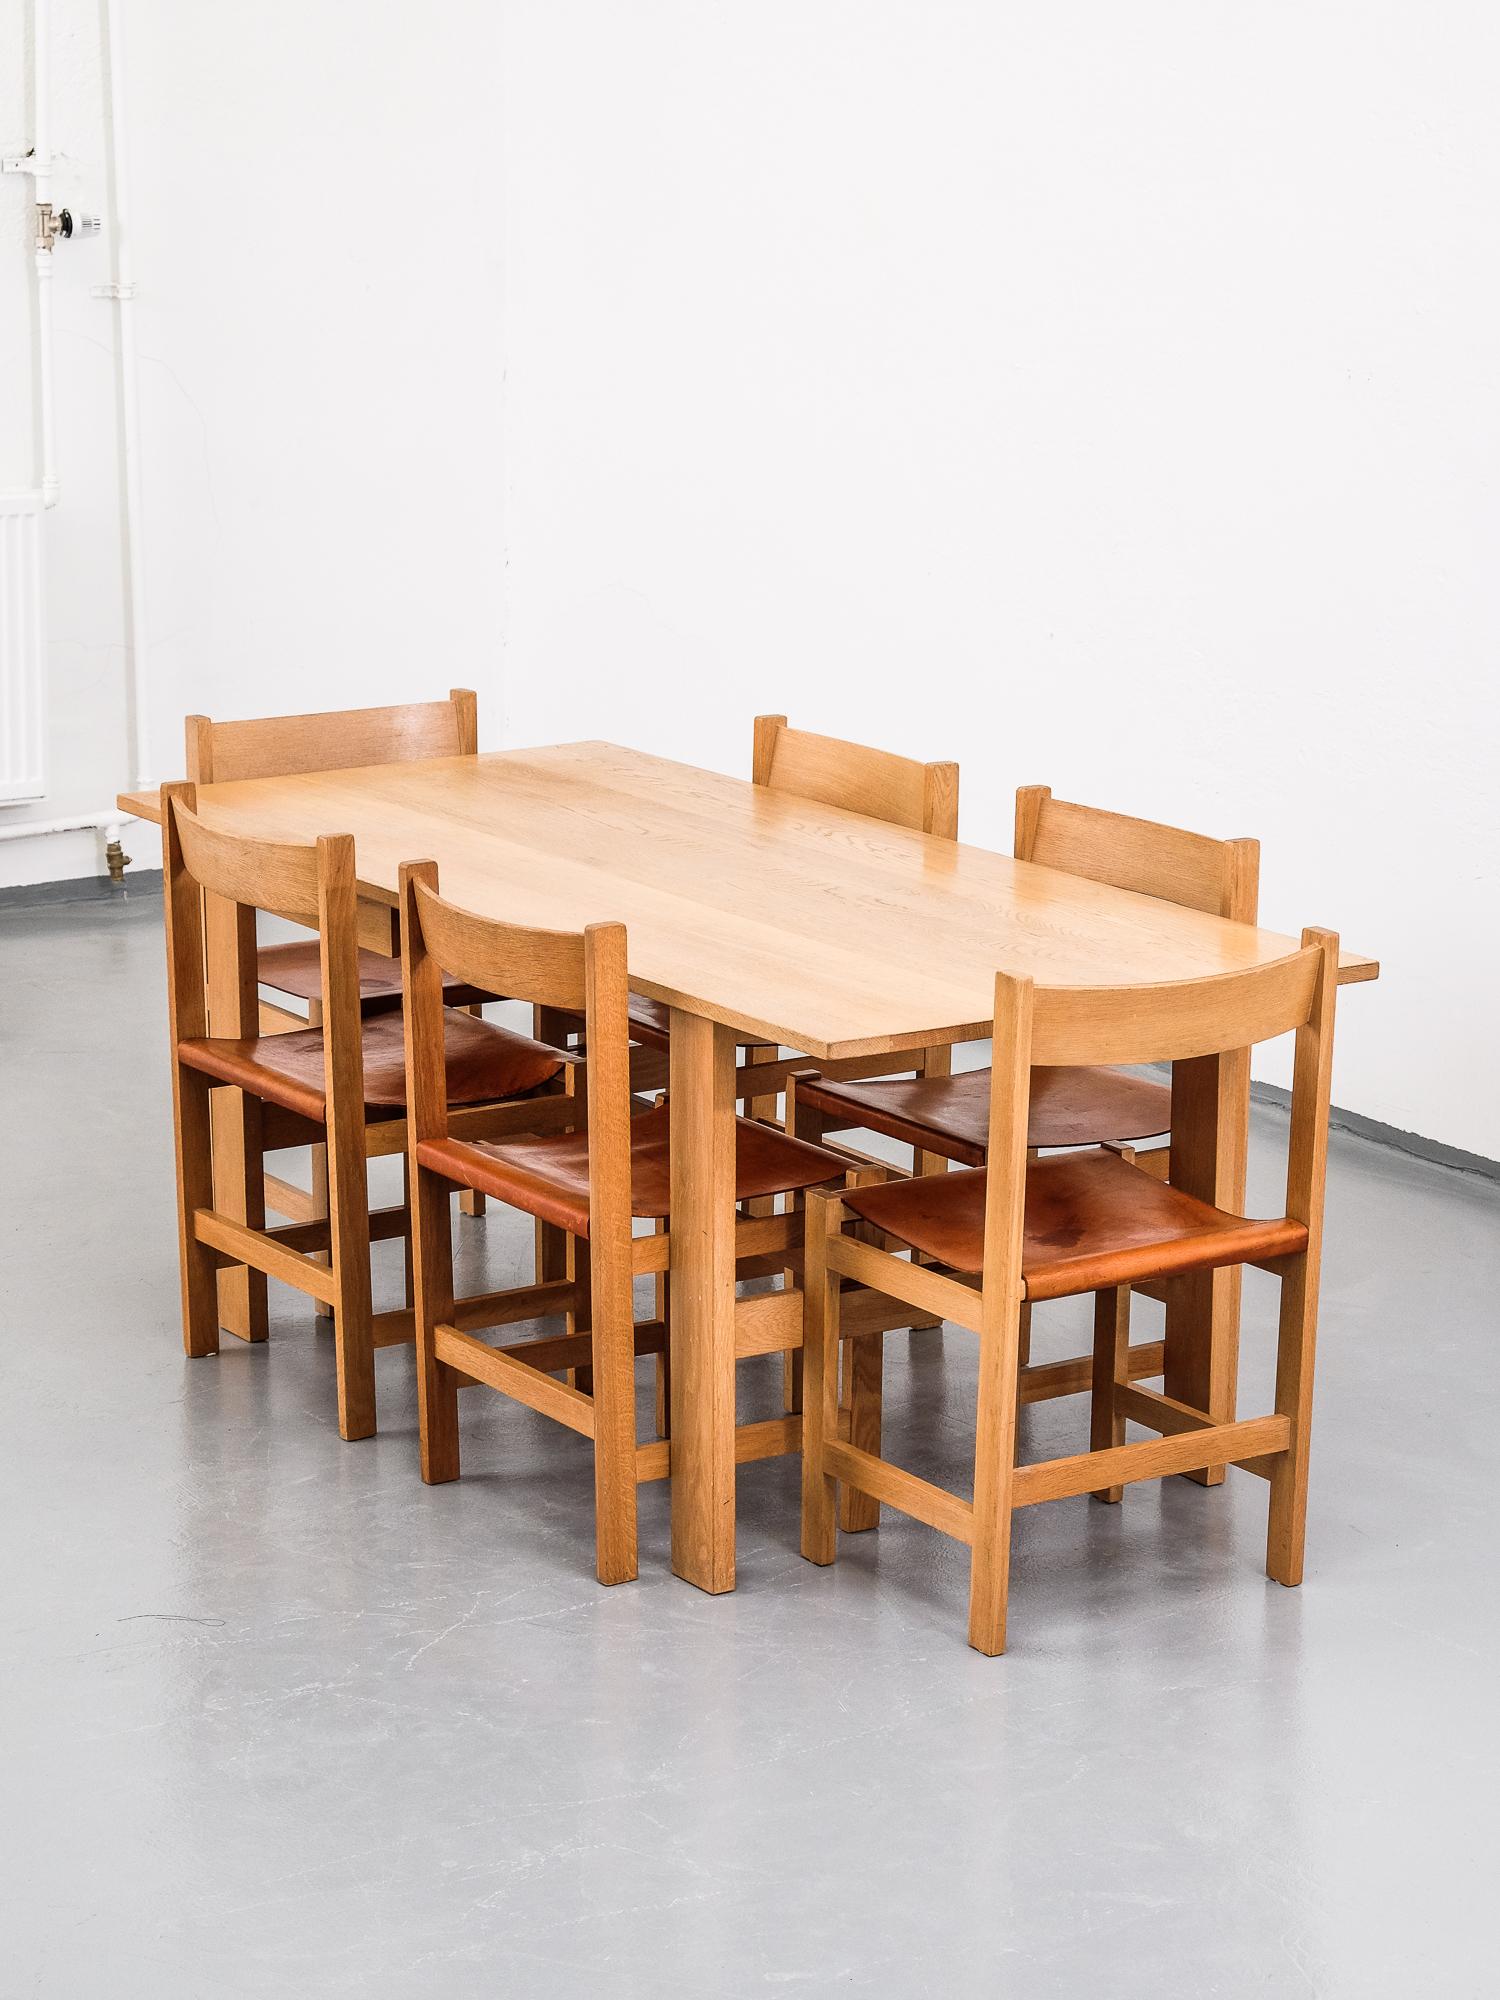 Great set of six Scandinavian midcentury oak and leather chairs and a dining table made of oak.

Unknown manufacturer. Beautiful patina on leather sling seats.

Table measurements:
180 cm x 79.5 cm
Height 72.5 cm

Chair measurements:
Width